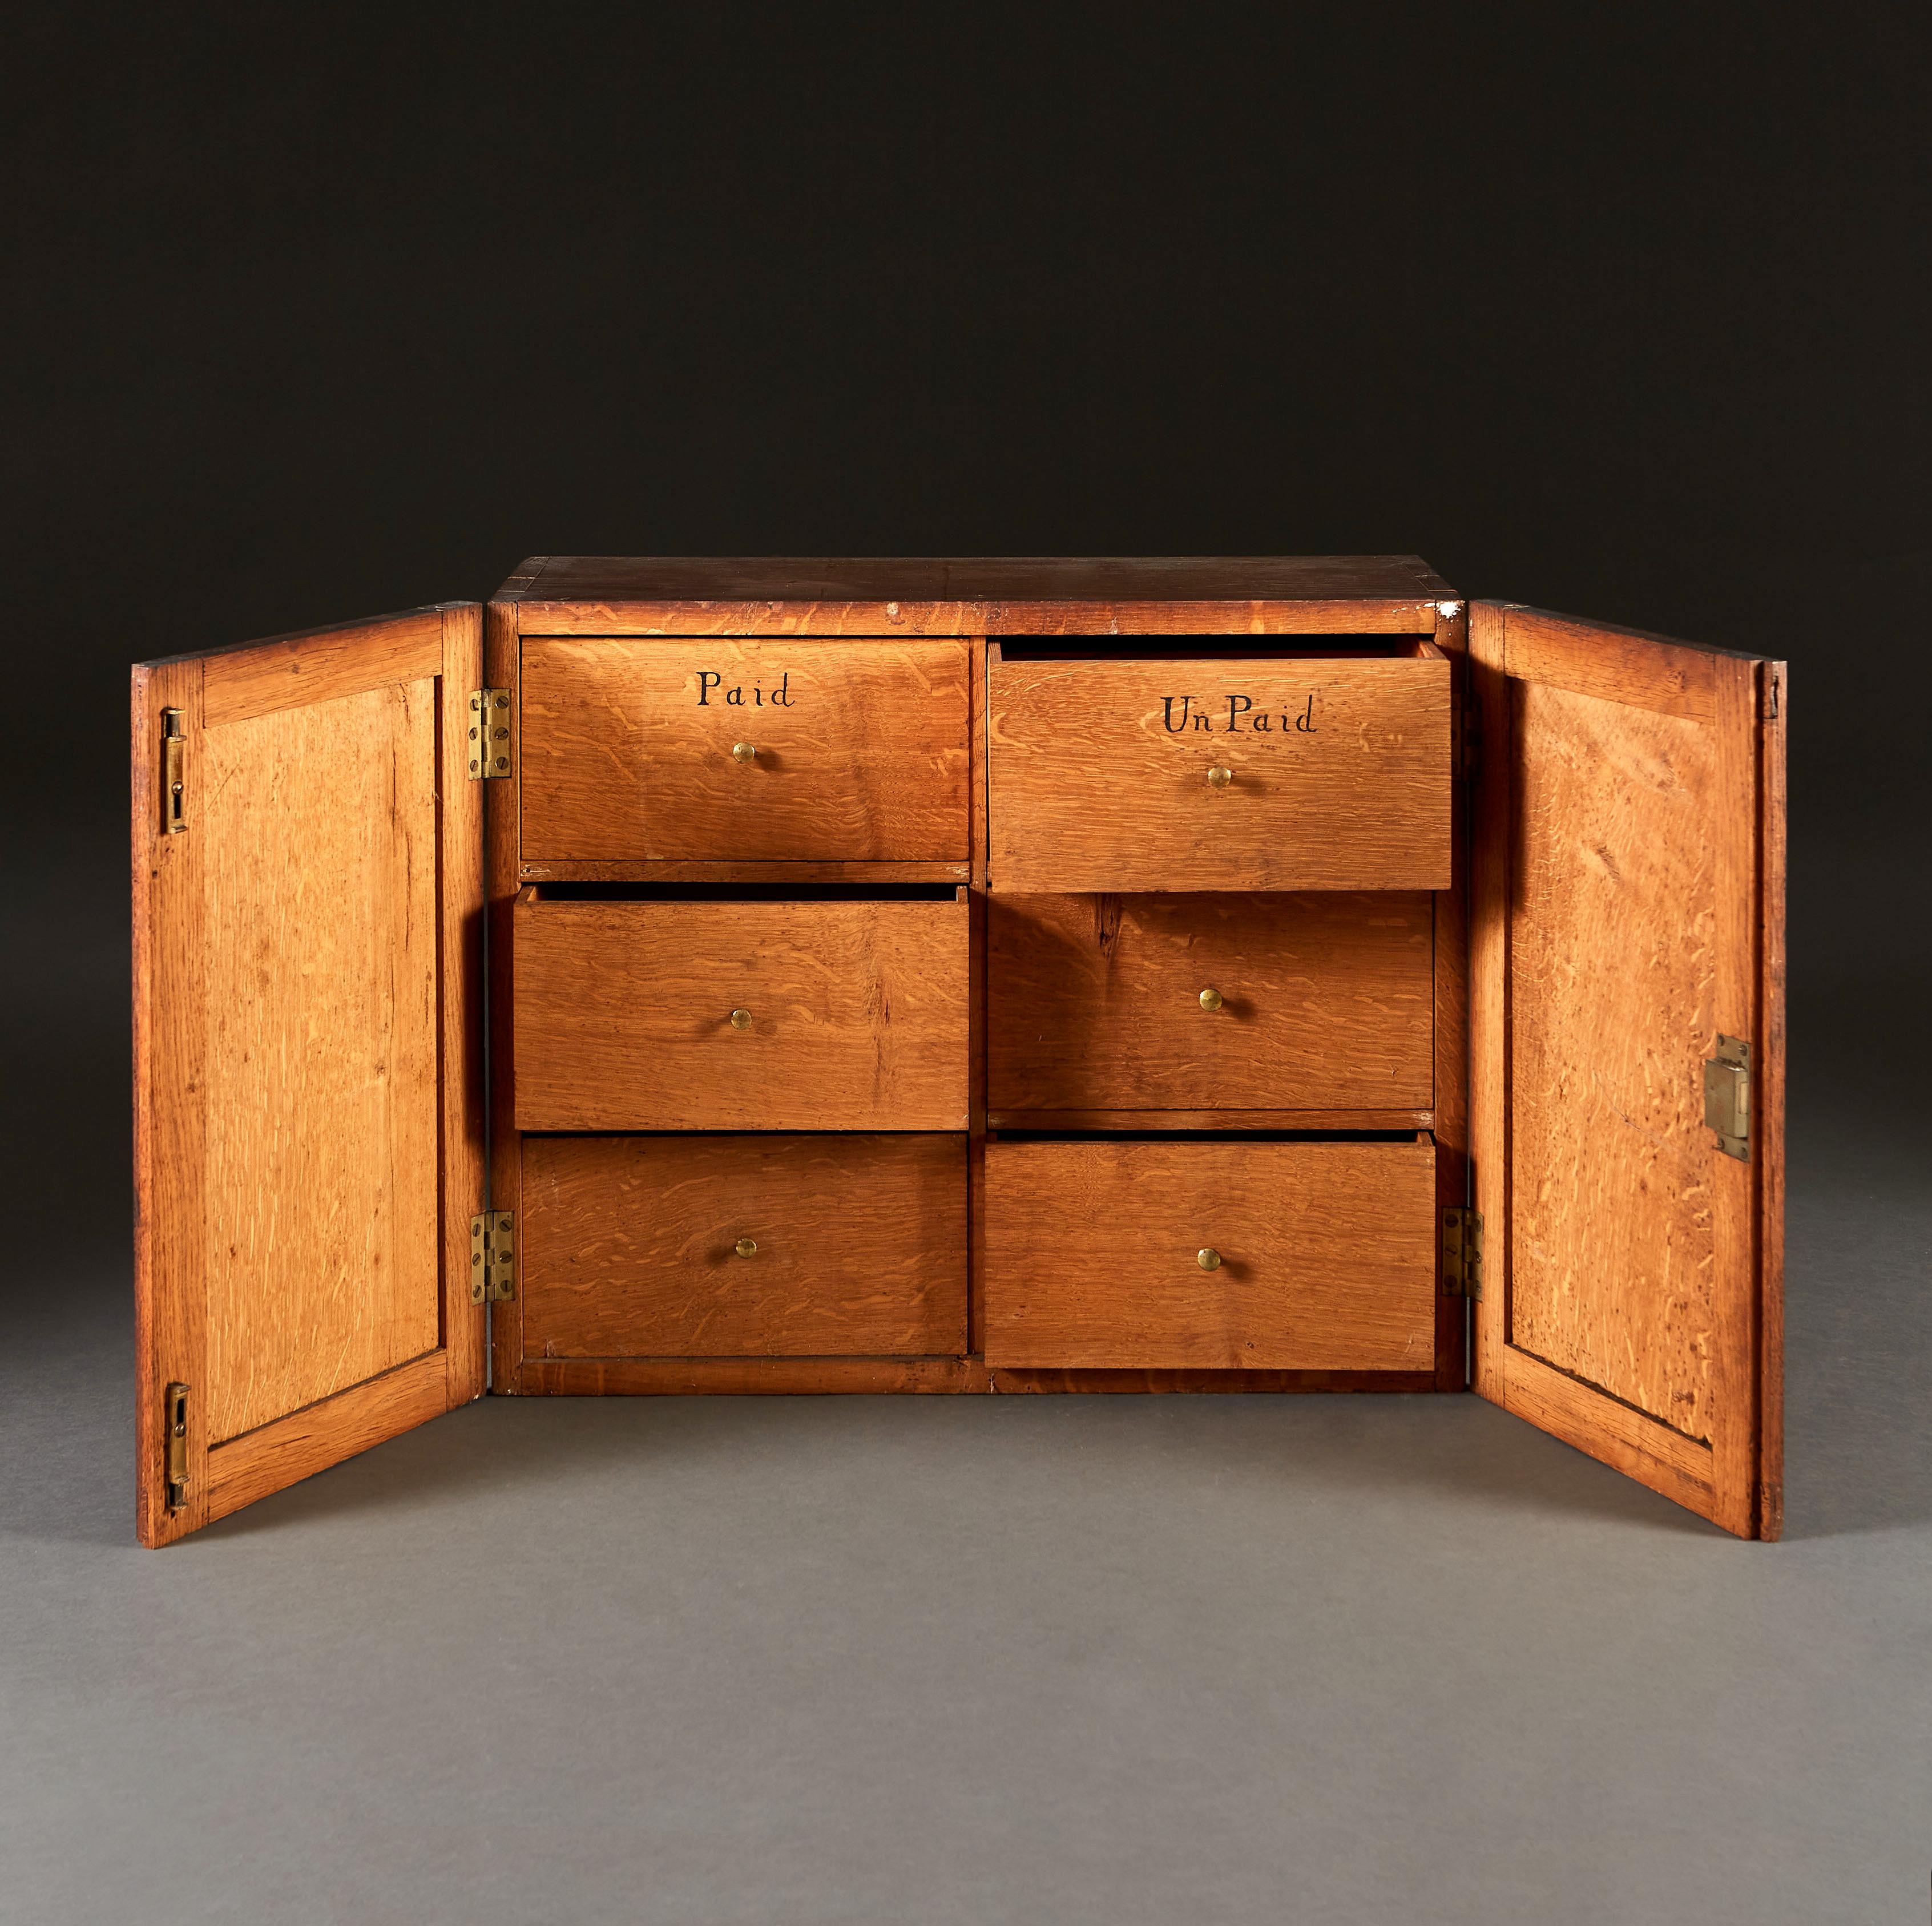 A late nineteenth century table top filing cabinet, probably from an estate office, with two cupboard doors opening to six drawers, the cupboard doors marked with the initials F.C.M. and the drawers marked for paid and unpaid invoices.